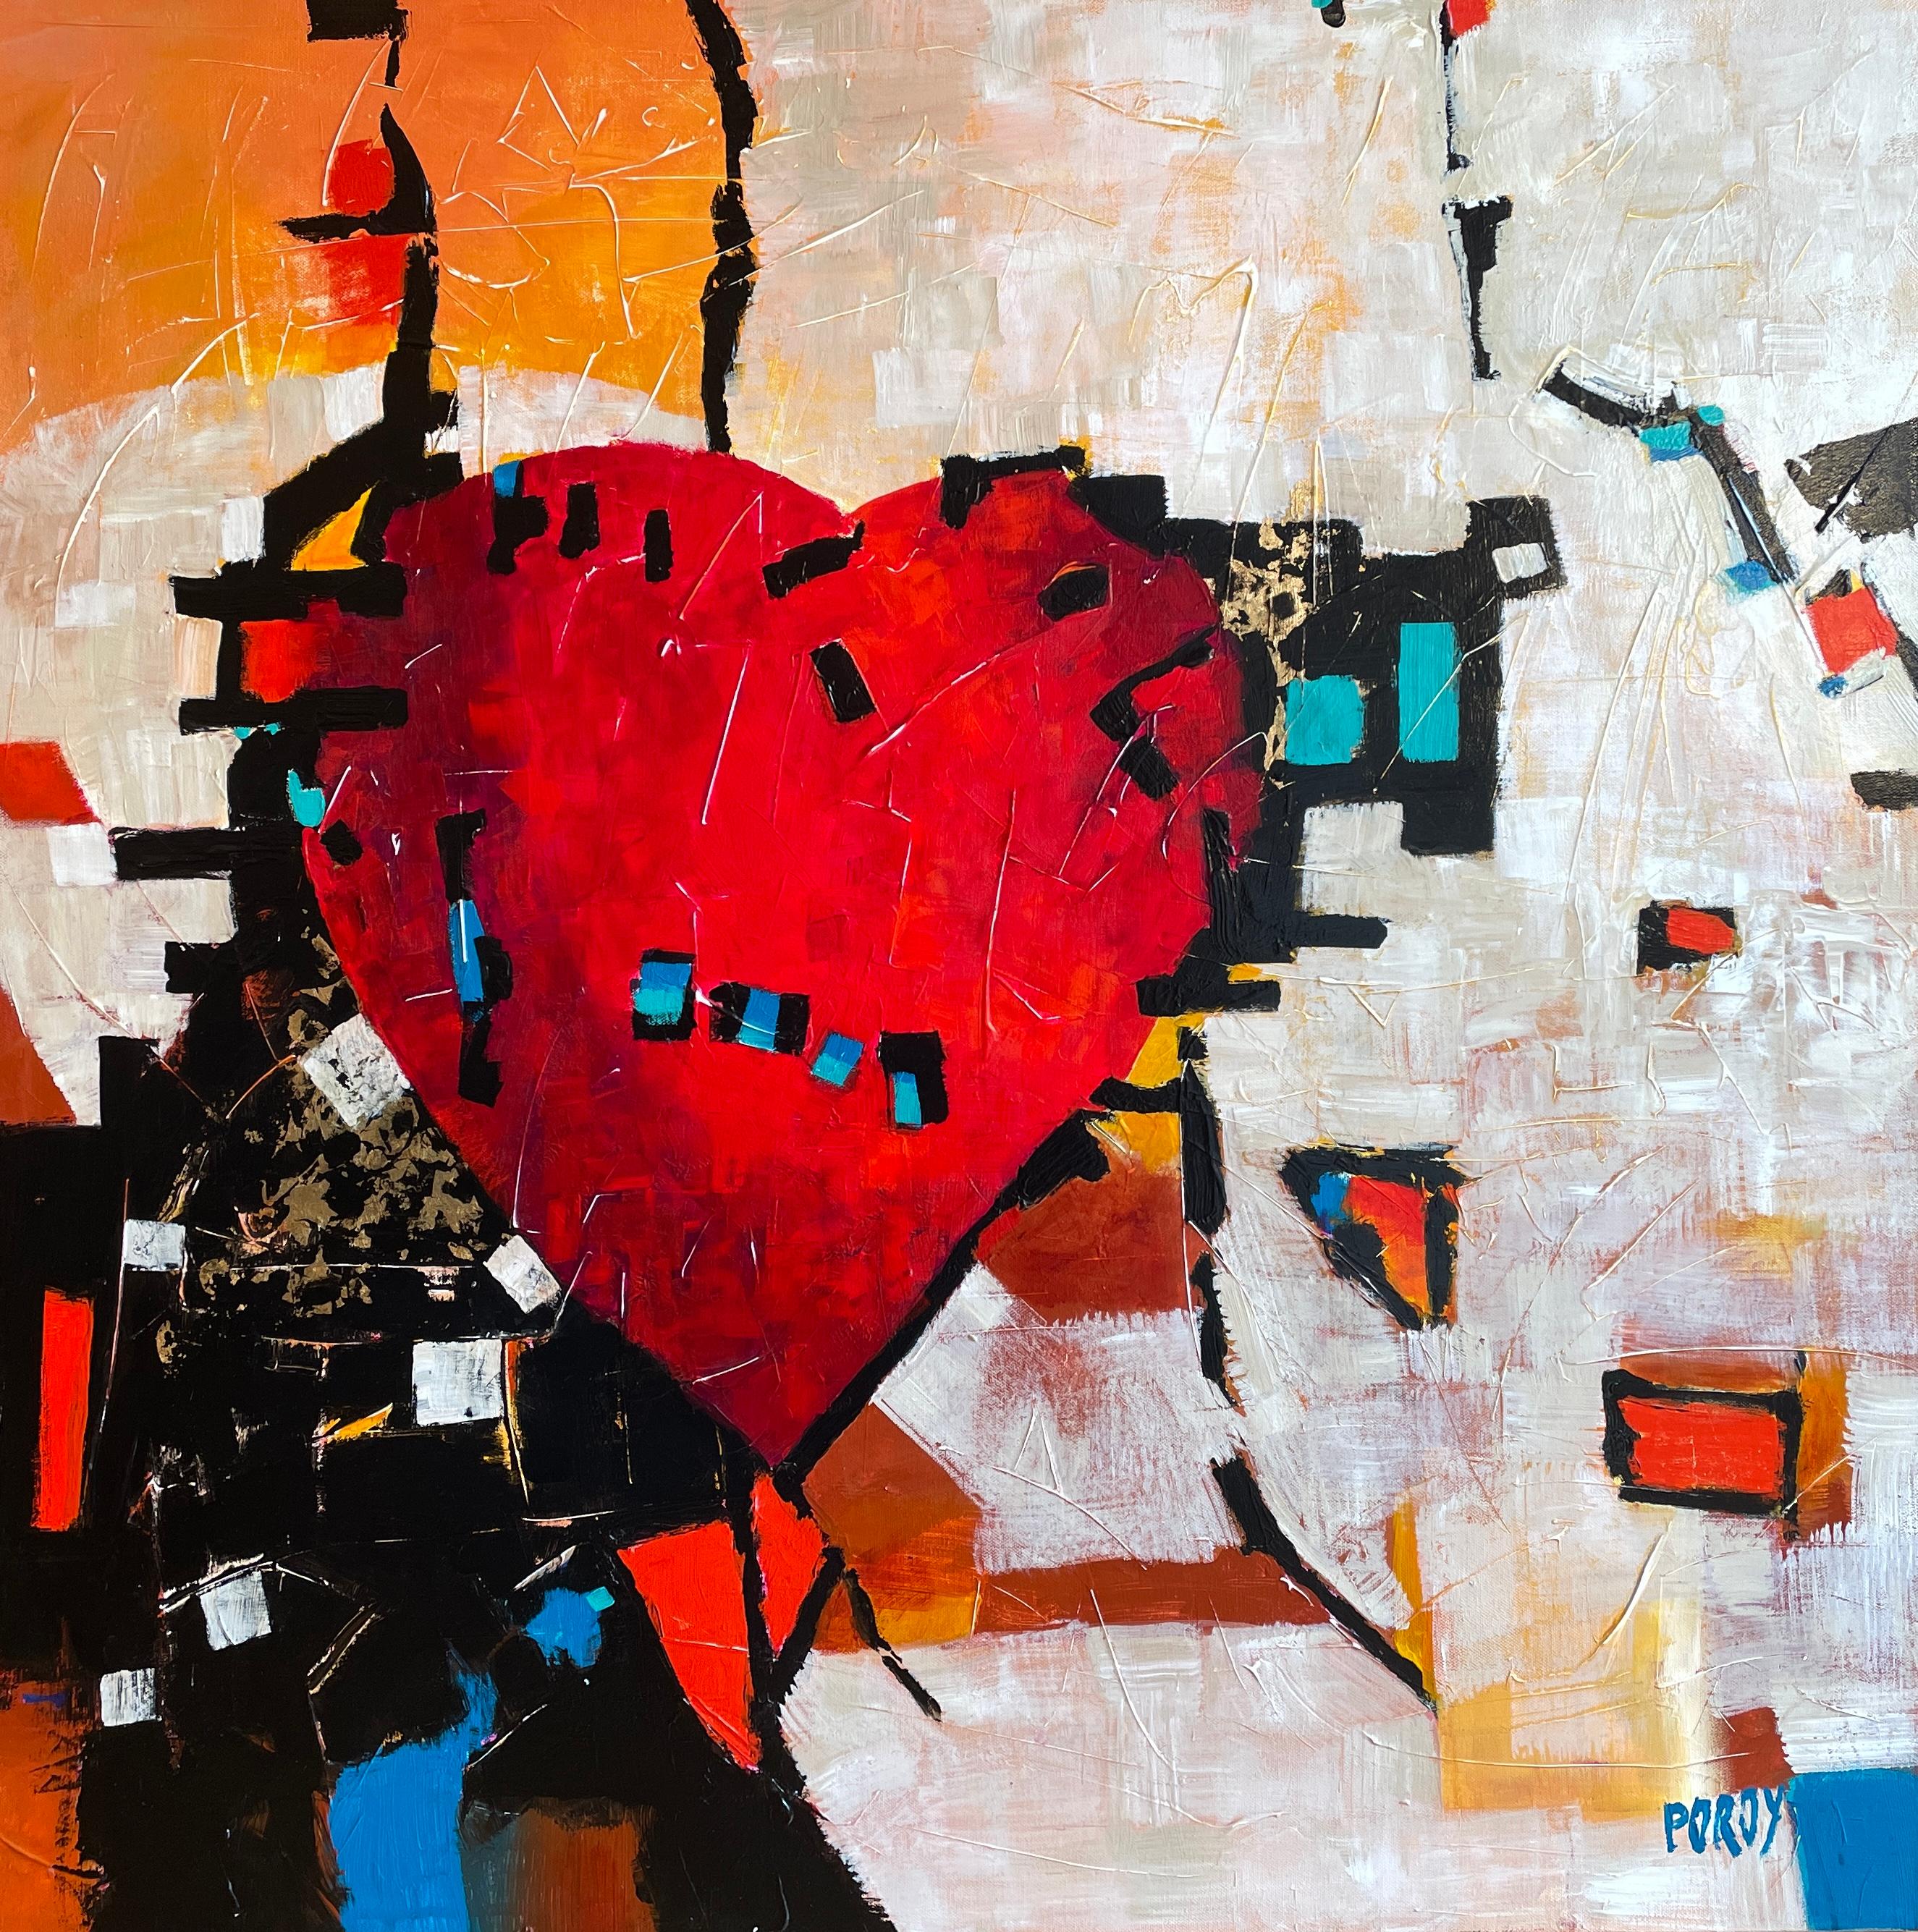 Maria Poroy Abstract Painting - 'Modern Home' - Bold Red Heart - Abstract Expressionist Mixed Media on Canvas